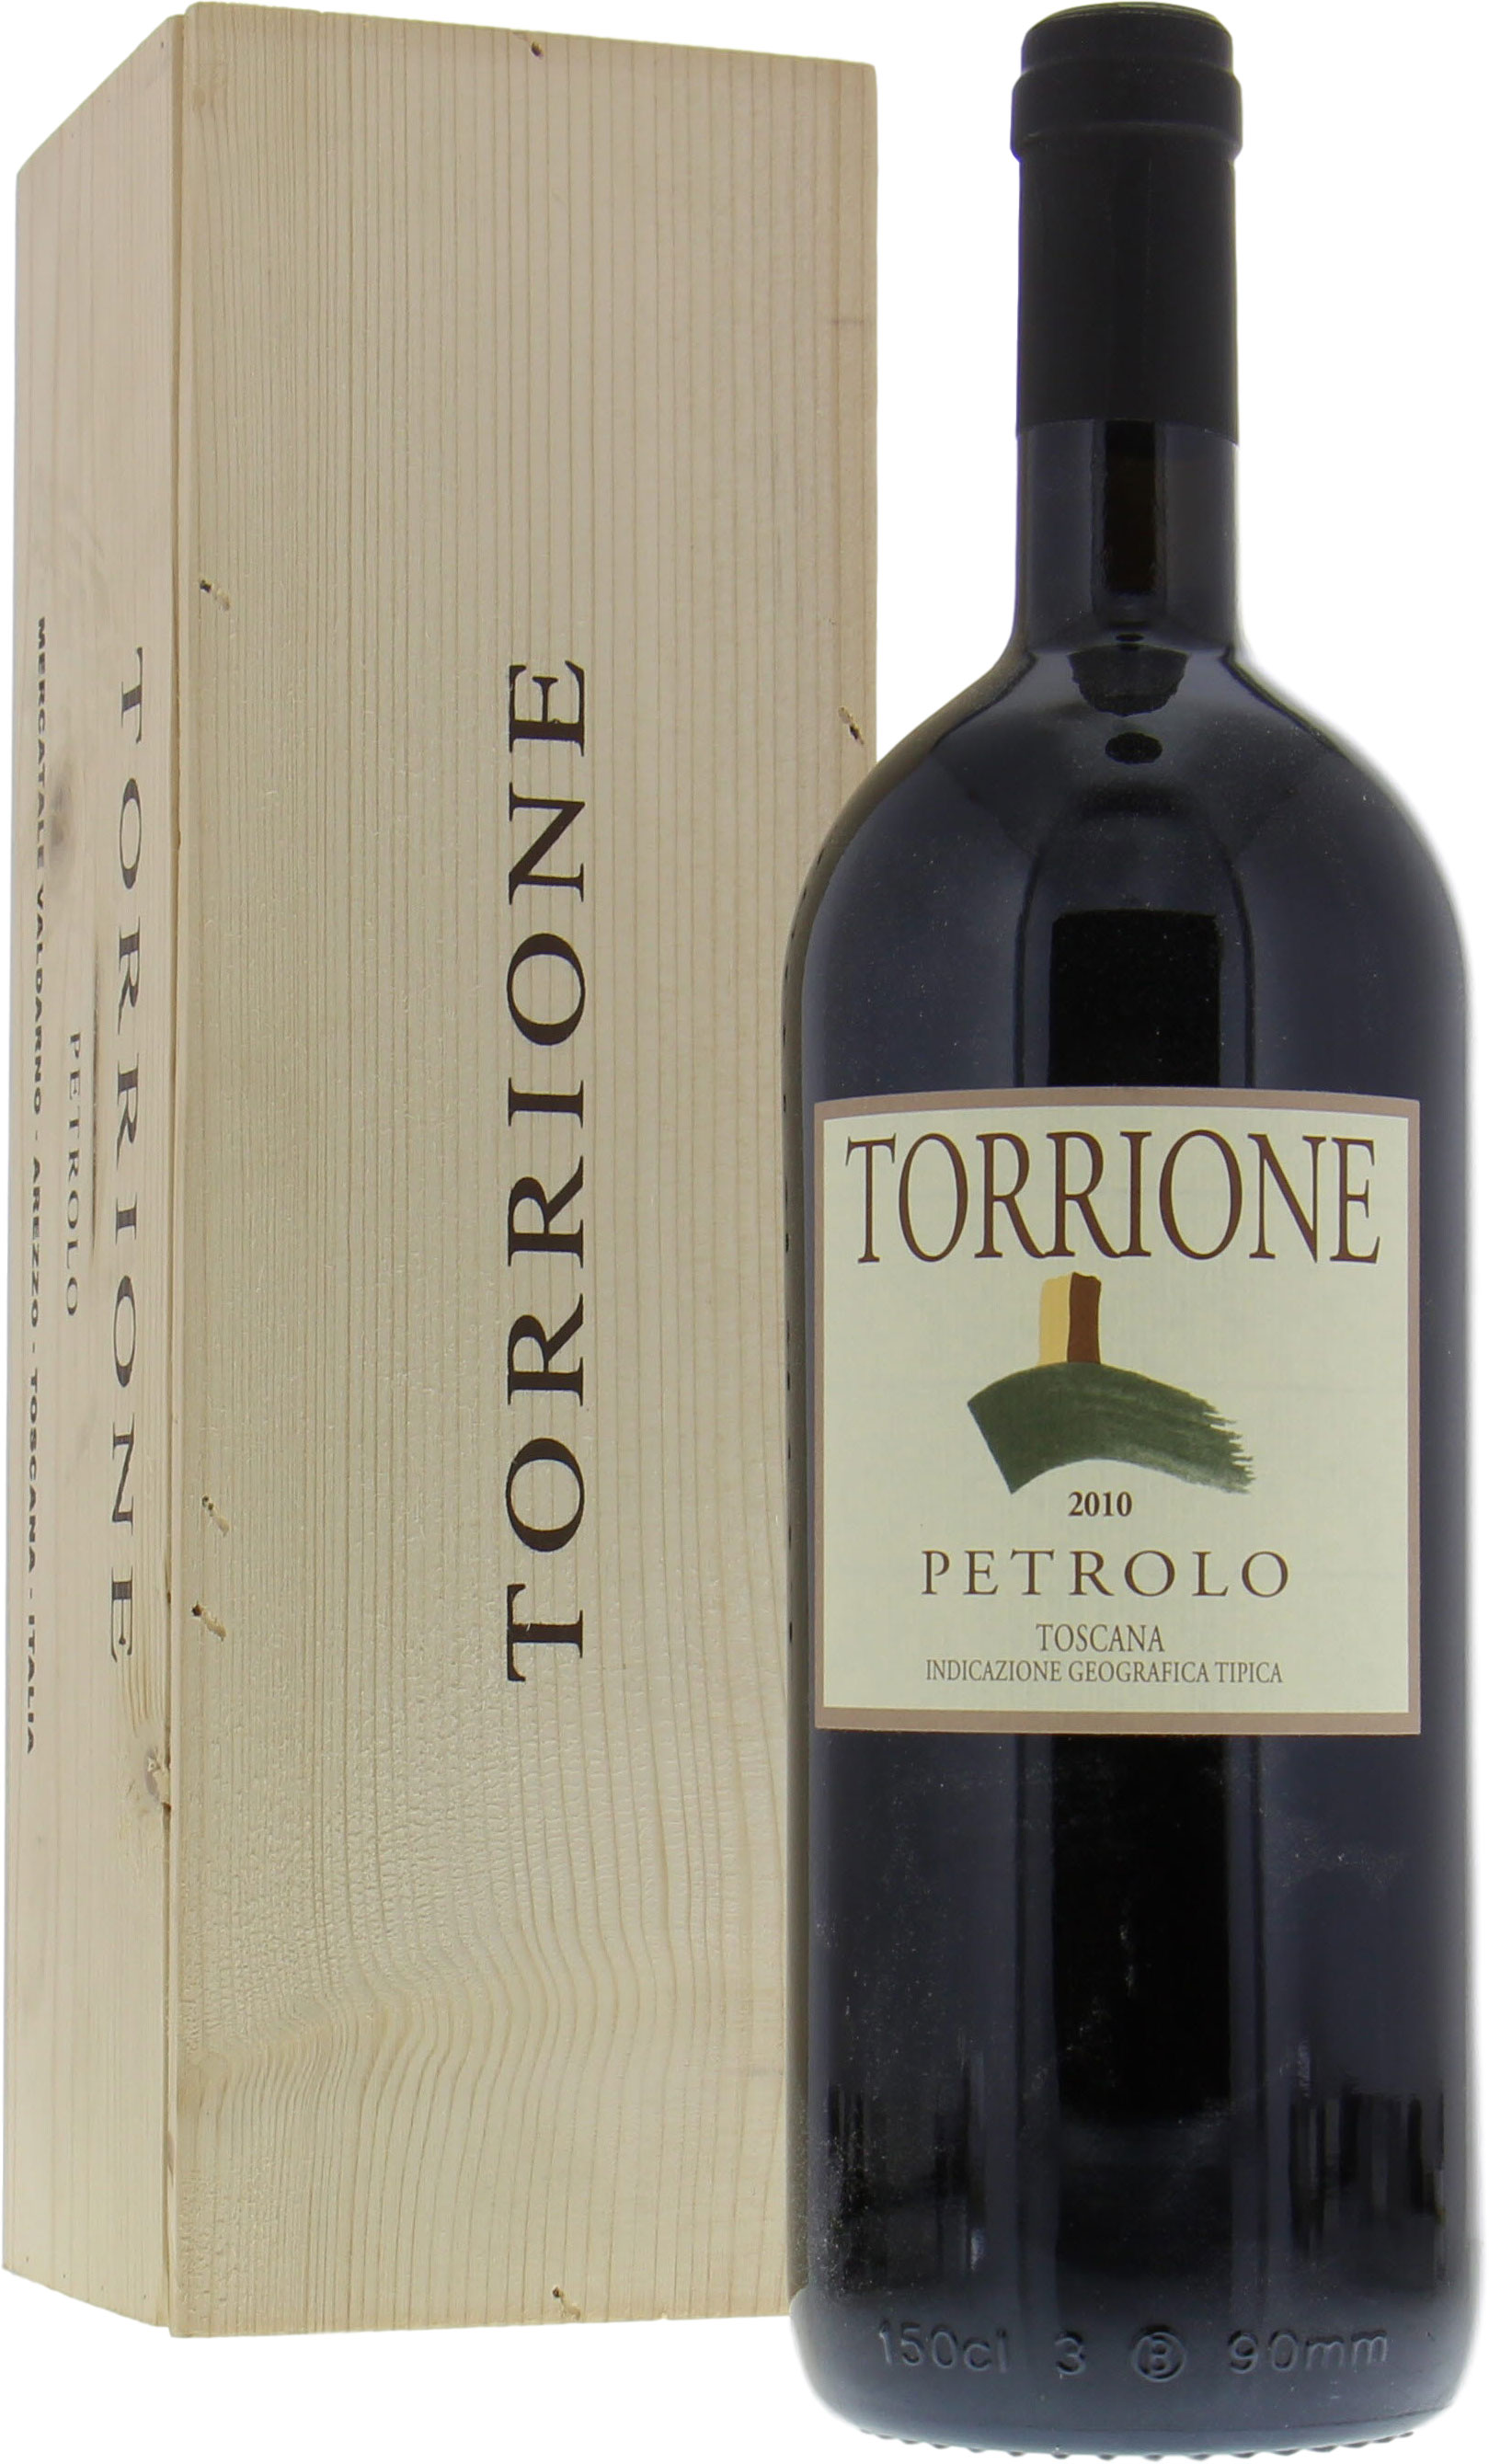 Petrolo - Torrione IGT 2010 From Original Wooden Case